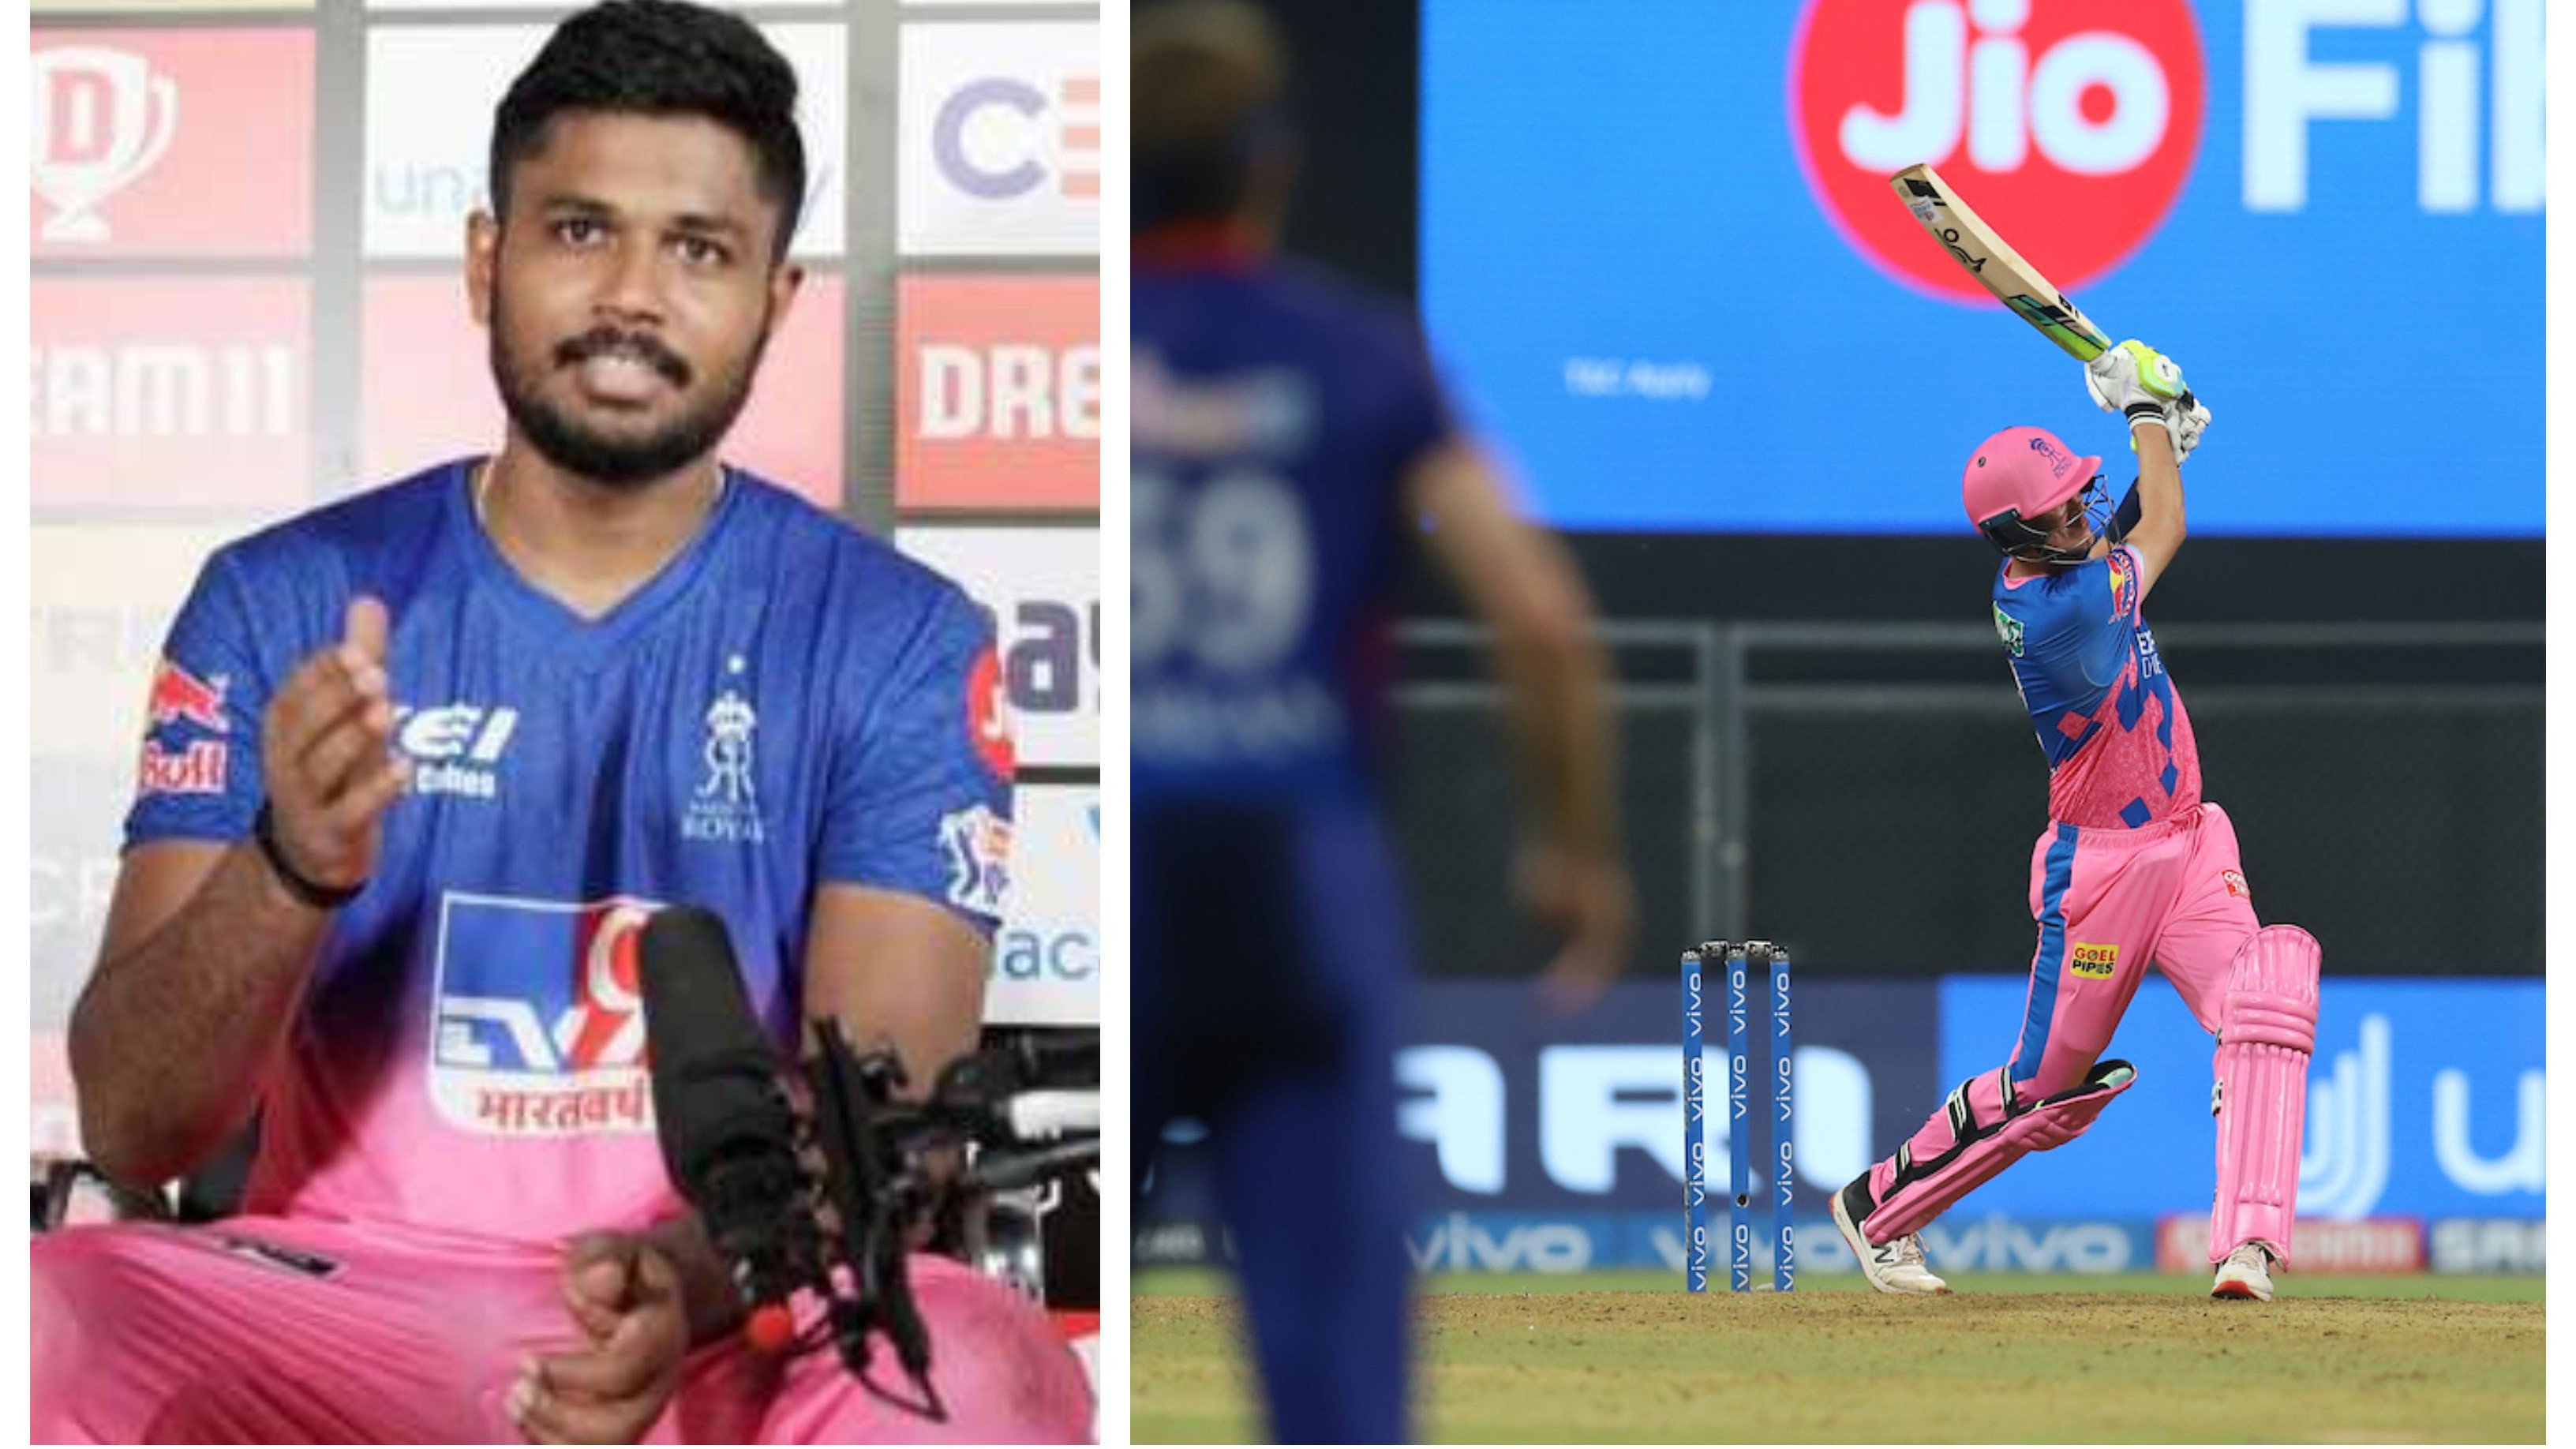 IPL 2021: Sanju Samson admits he thought winning against DC was tough after RR lost half the side for 42